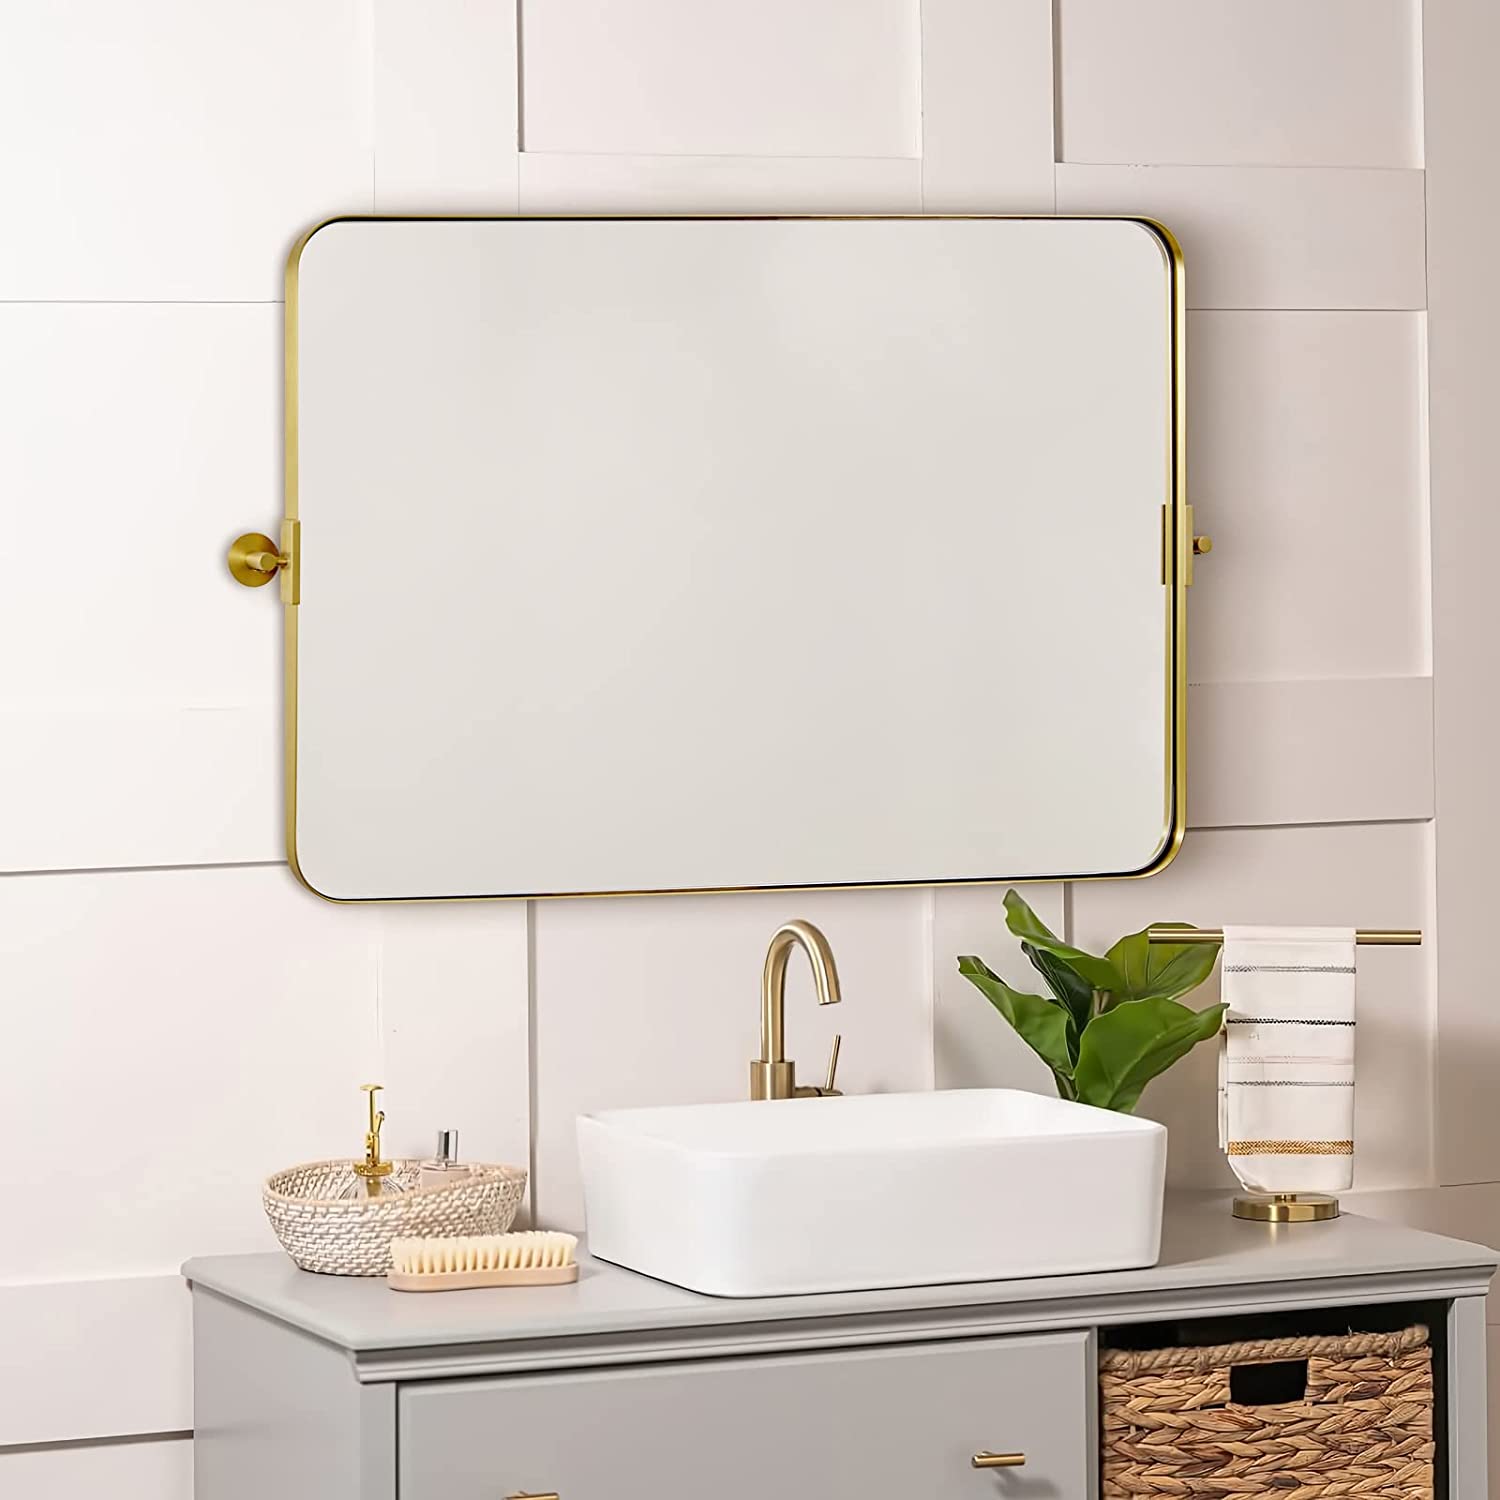 How to Choose a Wall Mirror for Your Bathroom